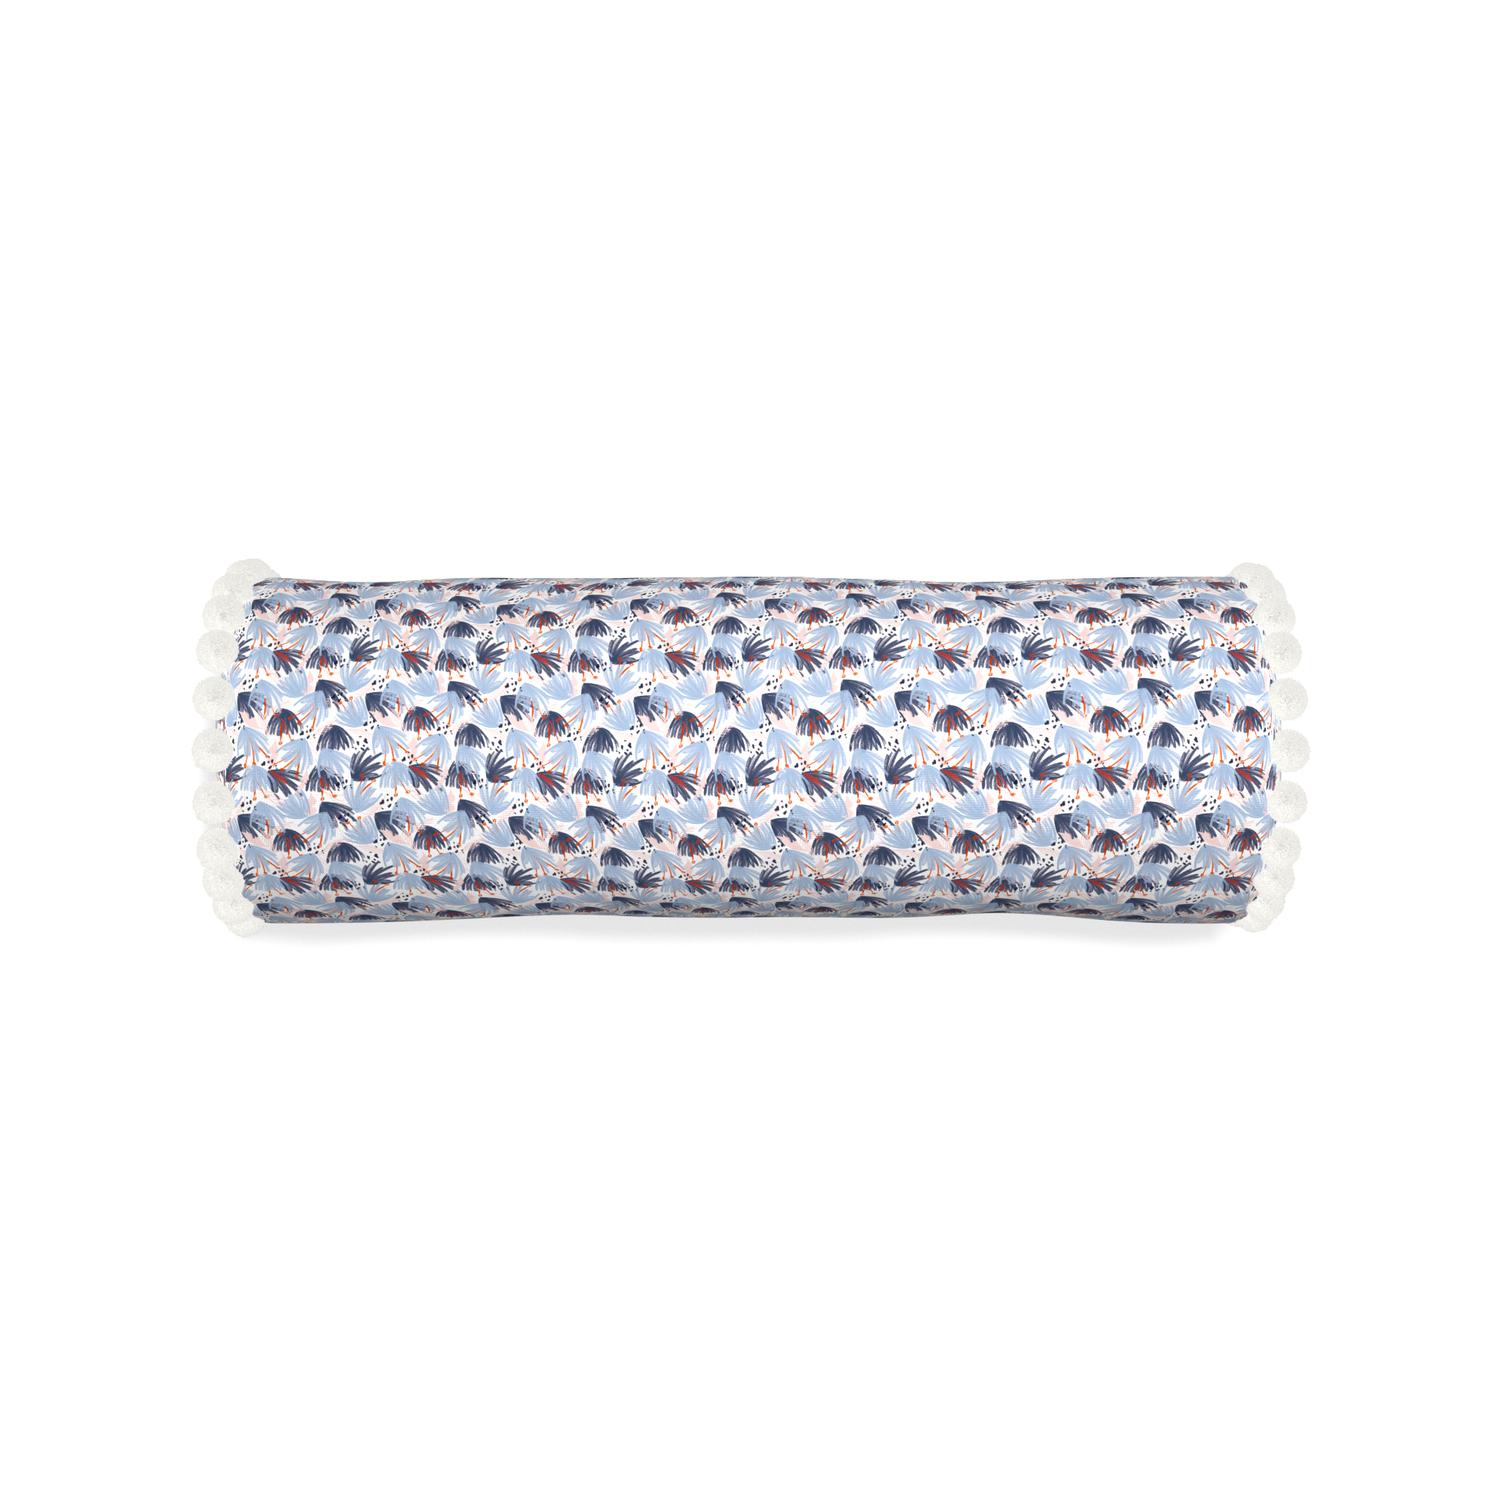 Bolster eden blue custom red and bluepillow with snow pom pom on white background